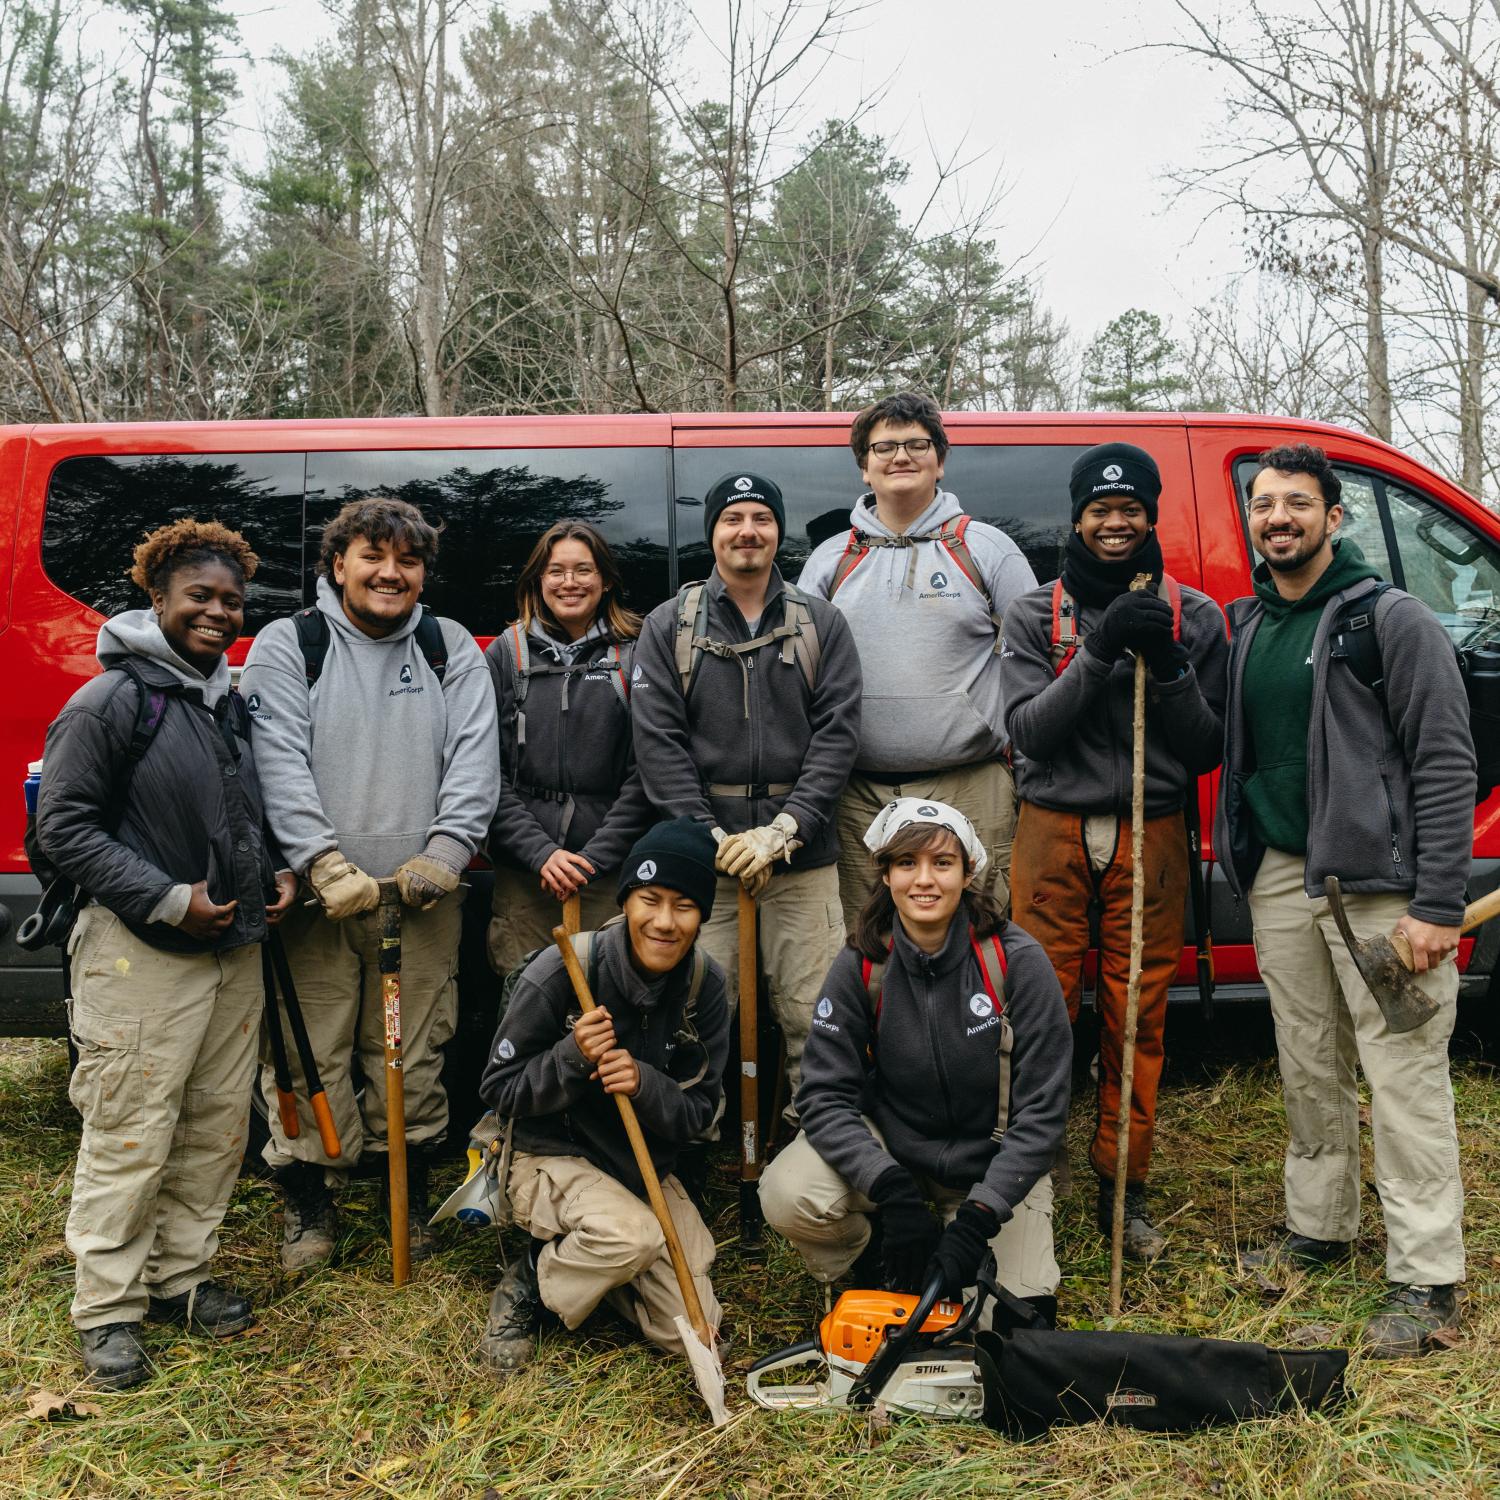 AmeriCorps NCCC team stands in front of red, 15-passenger van